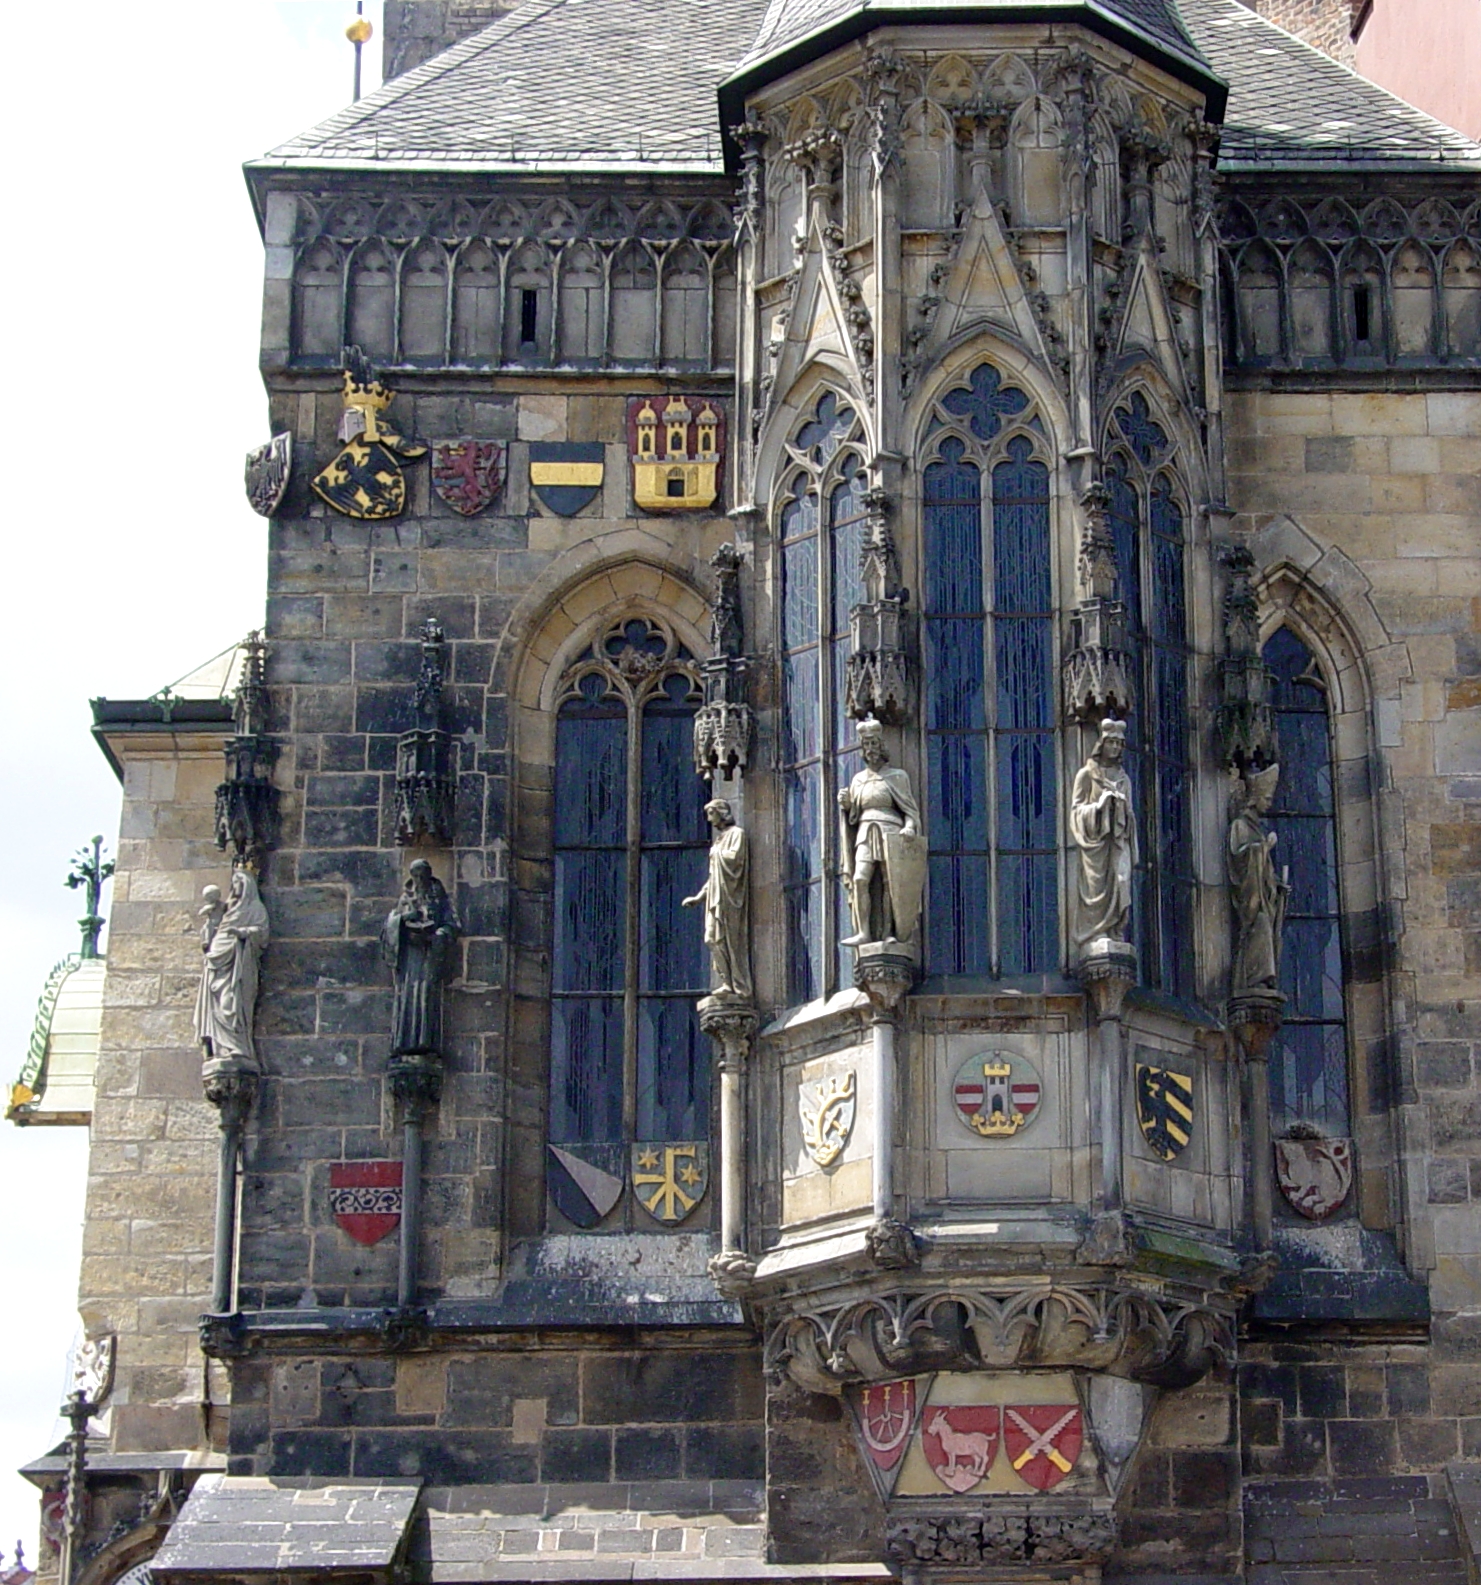 Townhall part with windows and sculptures